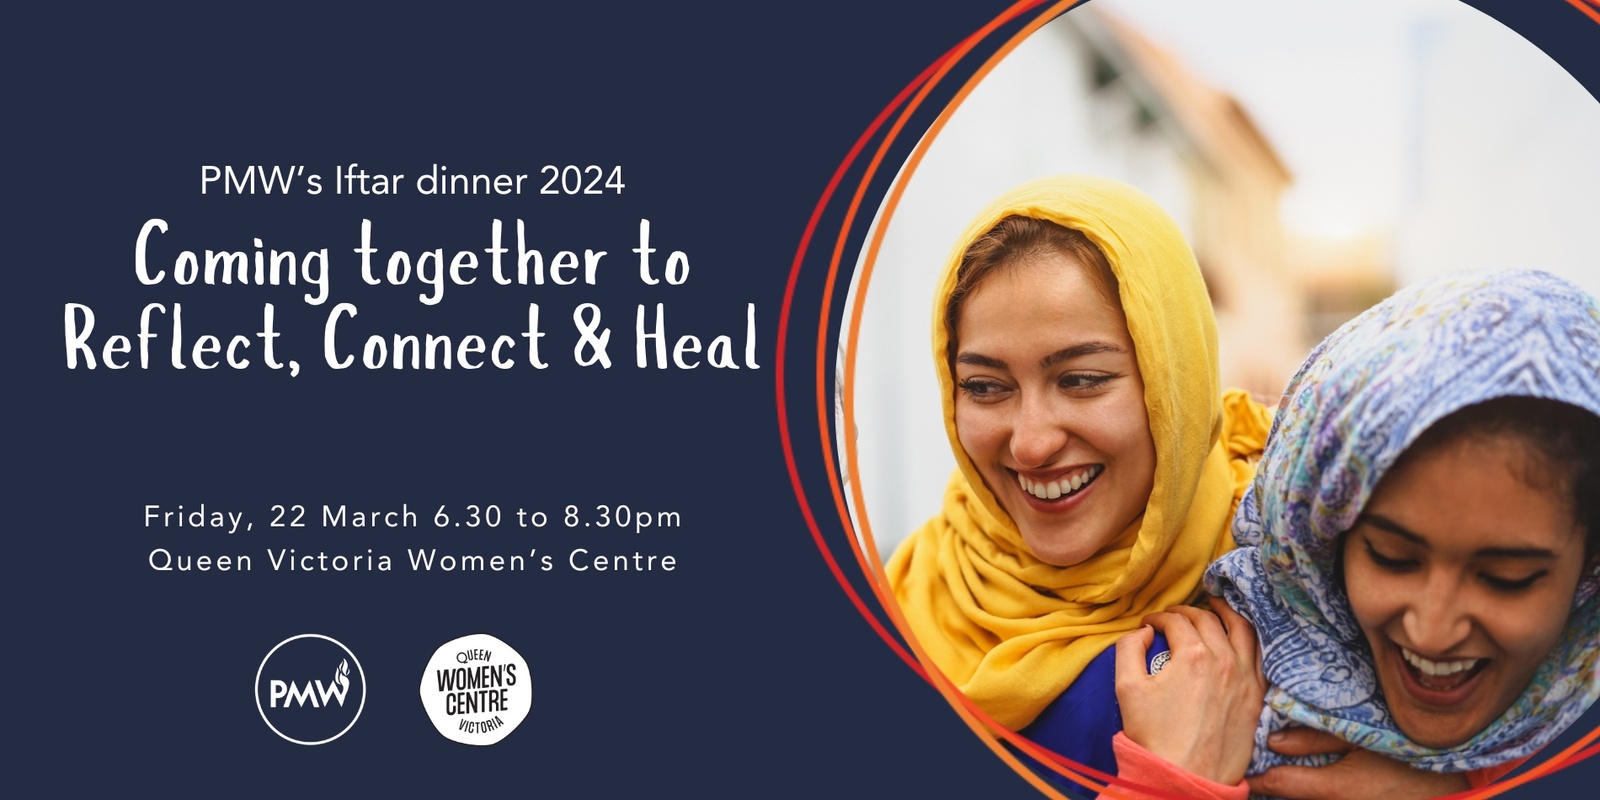 Banner image for PMW Women's Iftar Dinner: Coming together to Reflect, Connect and Heal